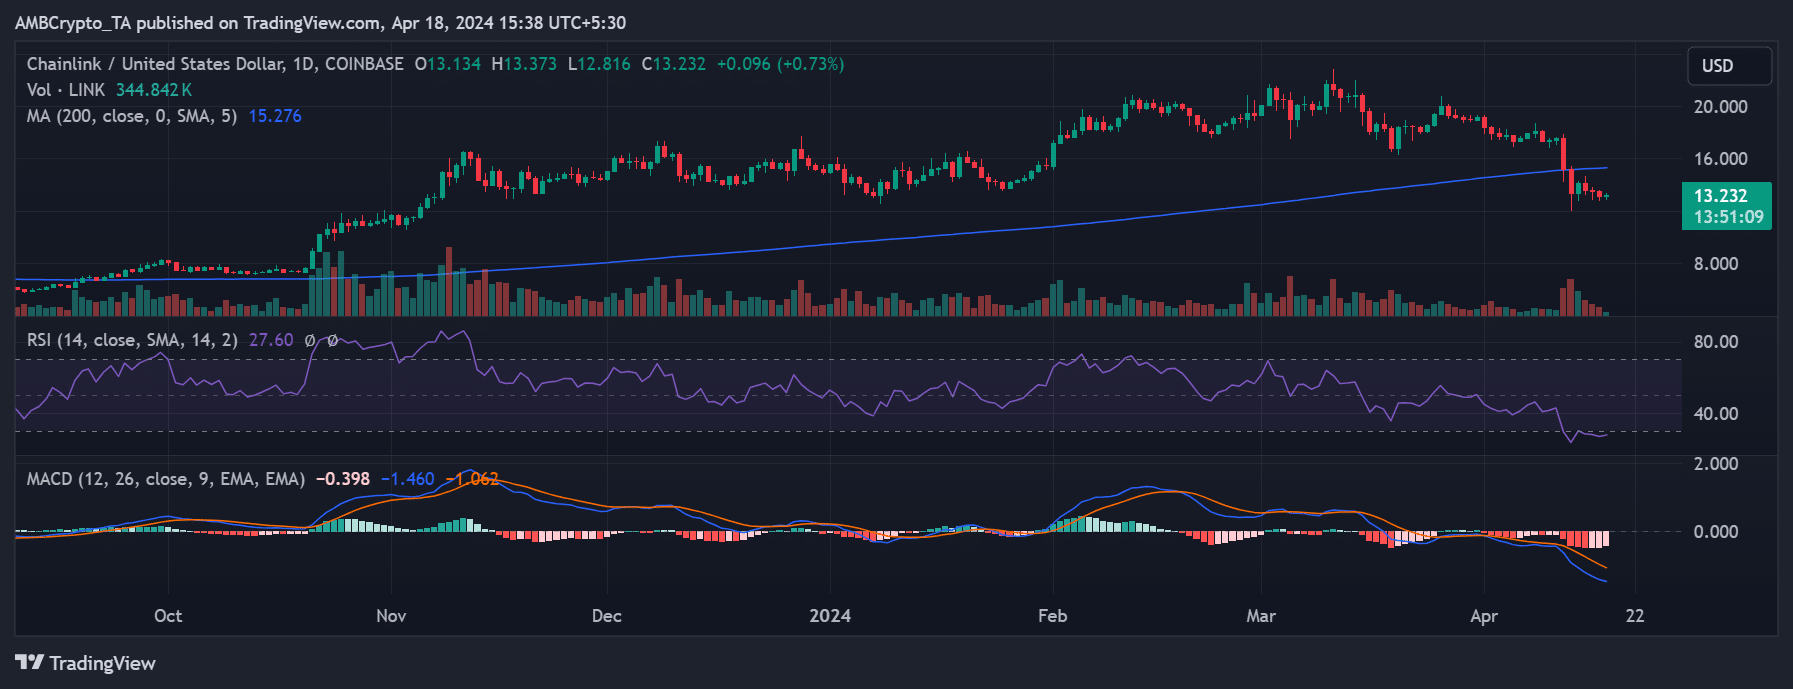 Chainlink price trend